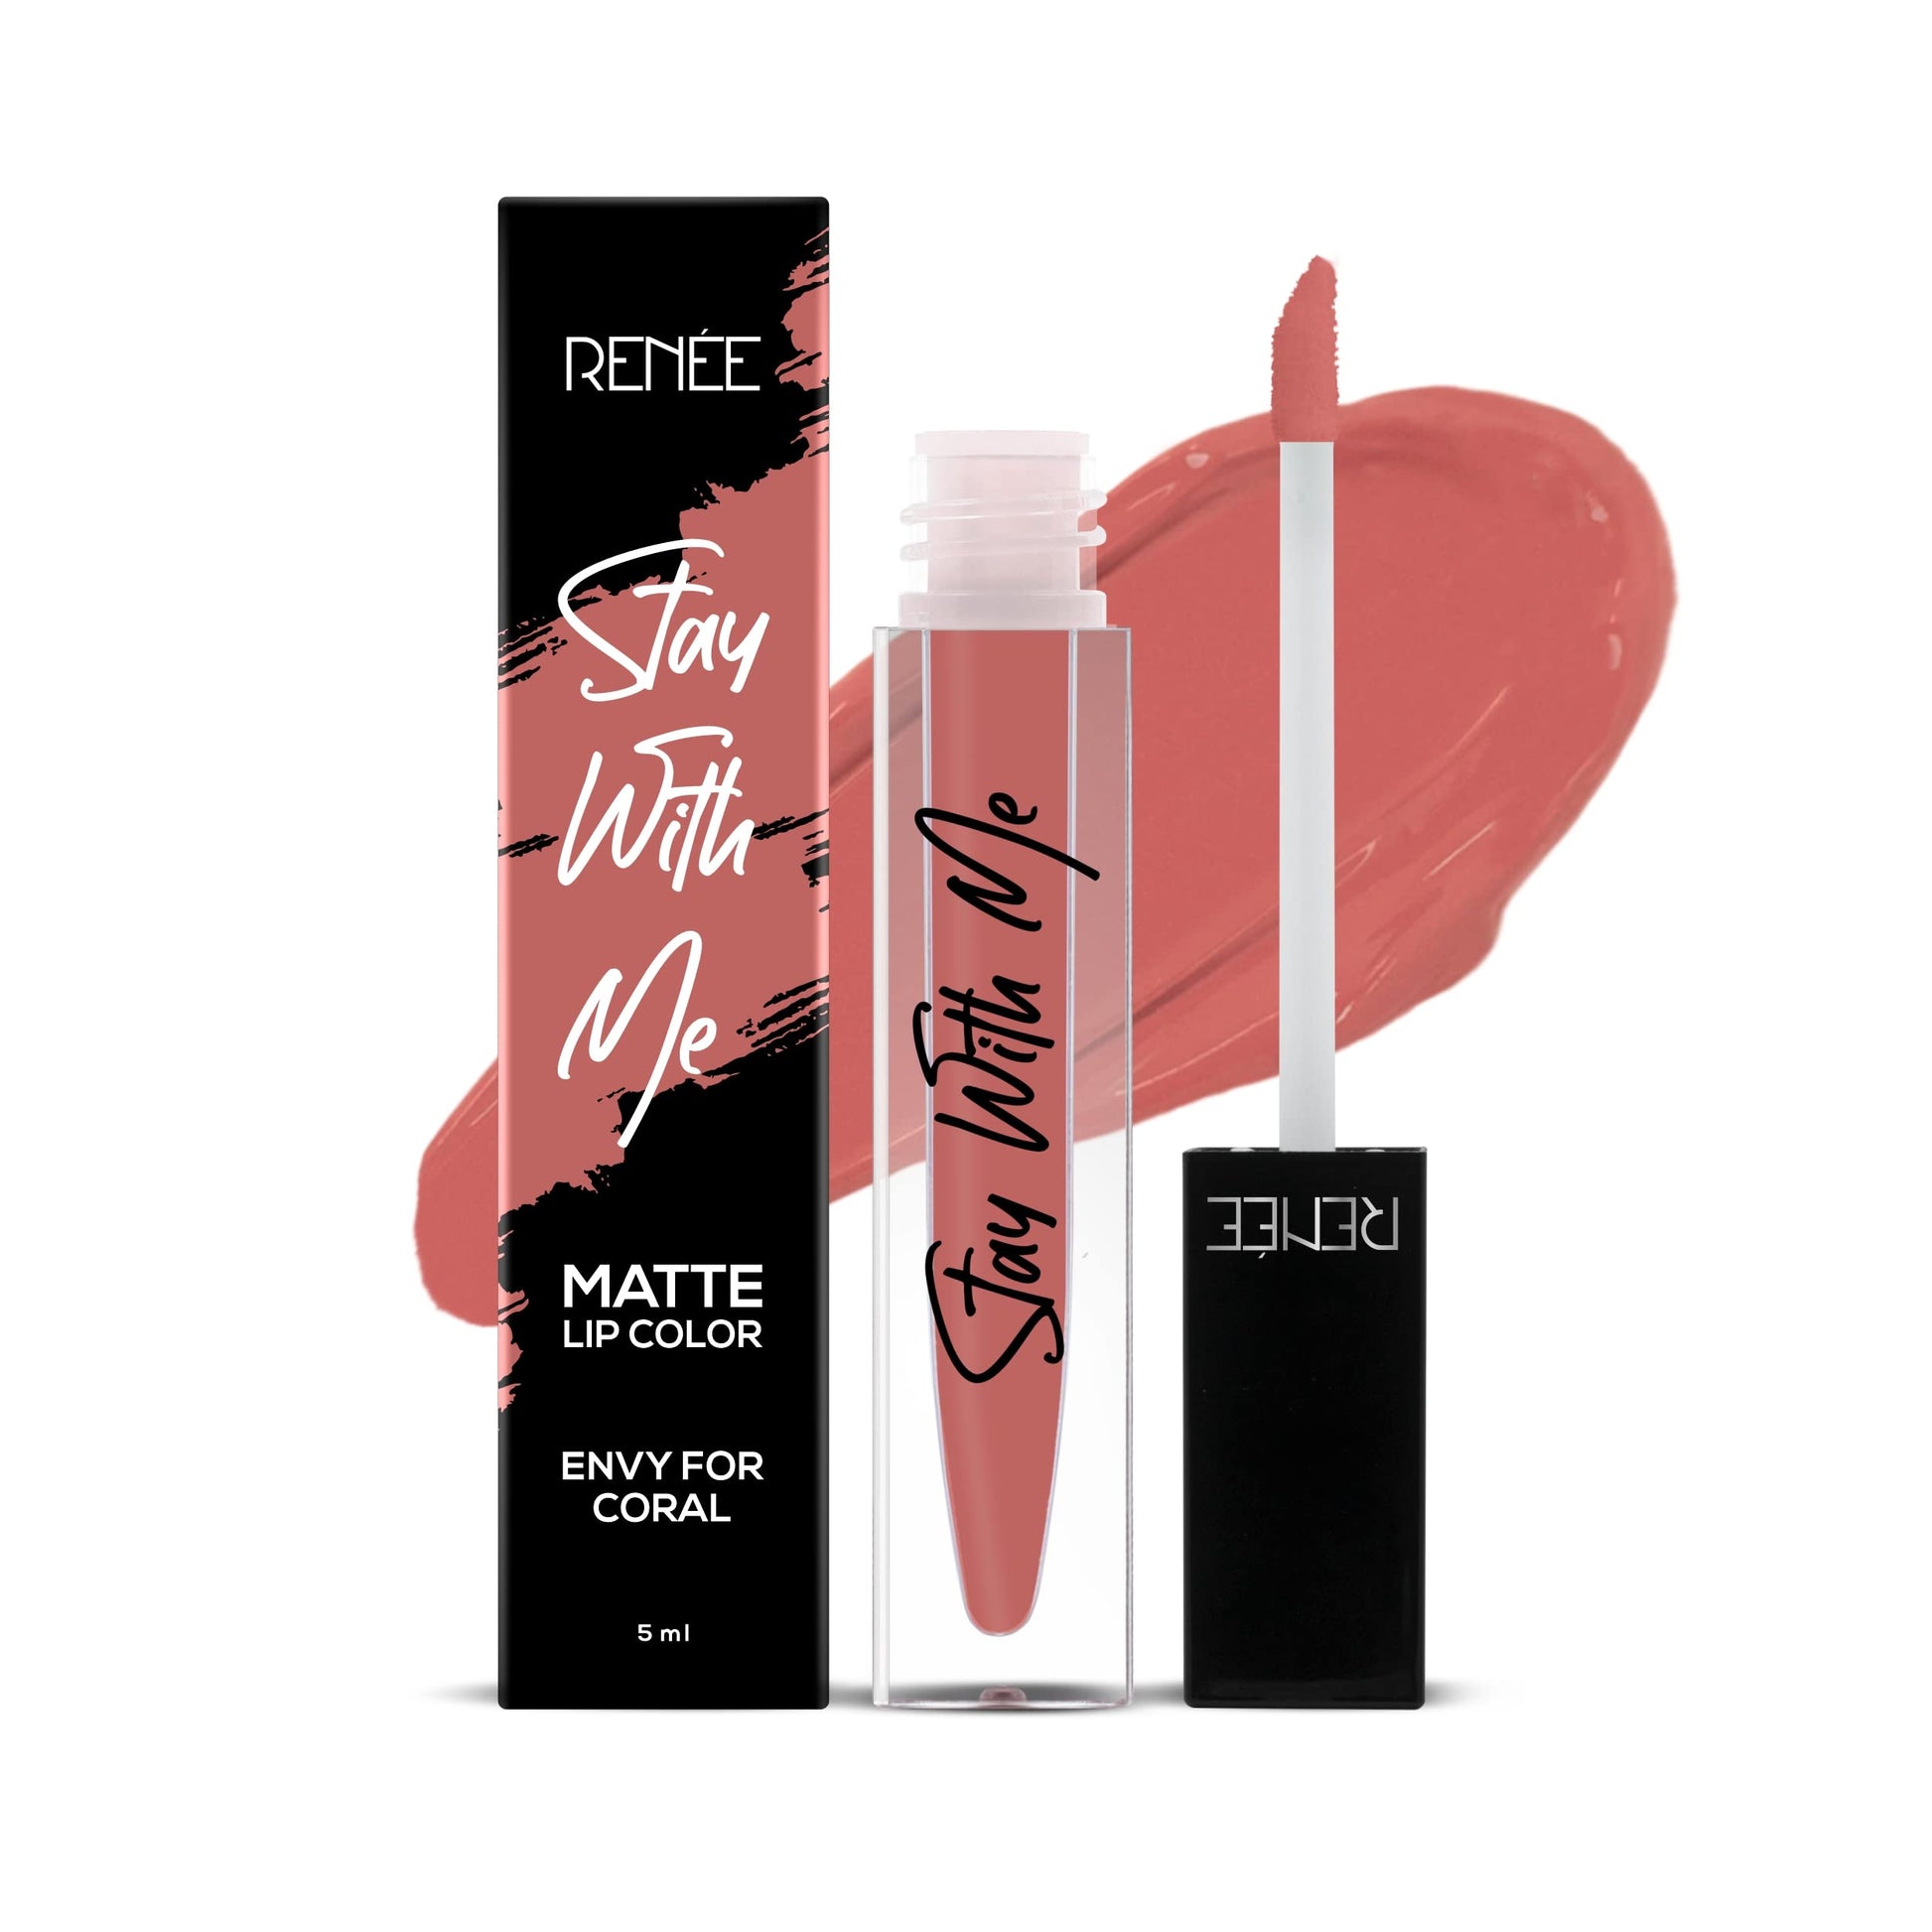 RENEE Stay With Me Matte Lip Color, Long Lasting, Non Transfer, Water & Smudge Proof, Light Weight Liquid Lipstick, Envy for Coral, 5ml  from RENEE